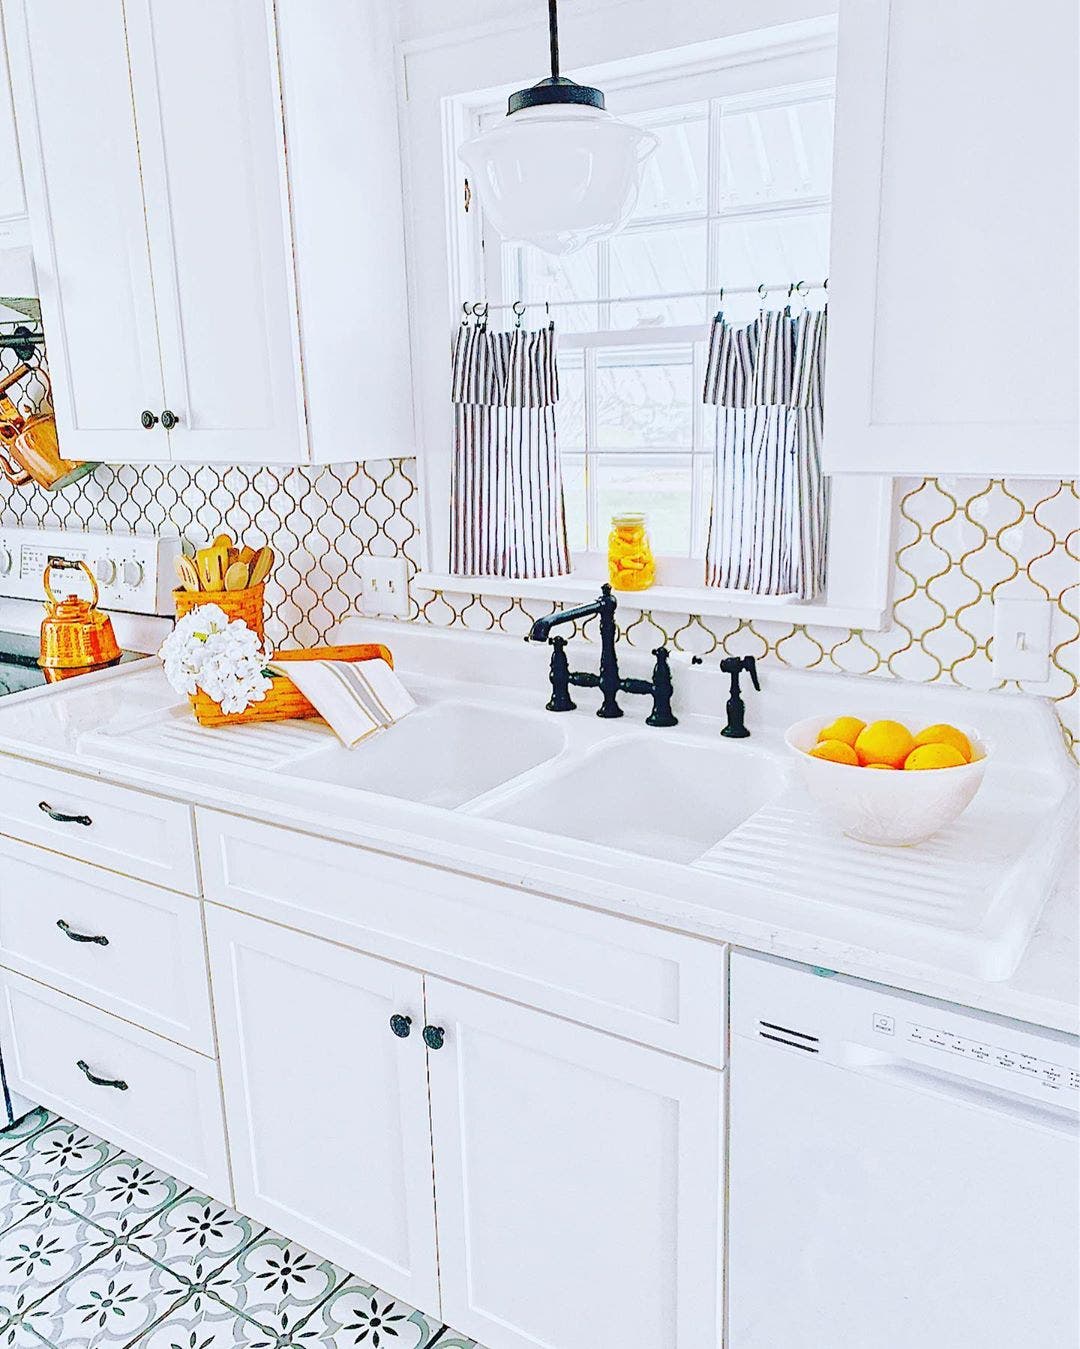 Choosing the Best Faucet for Your Farmhouse Kitchen Sink